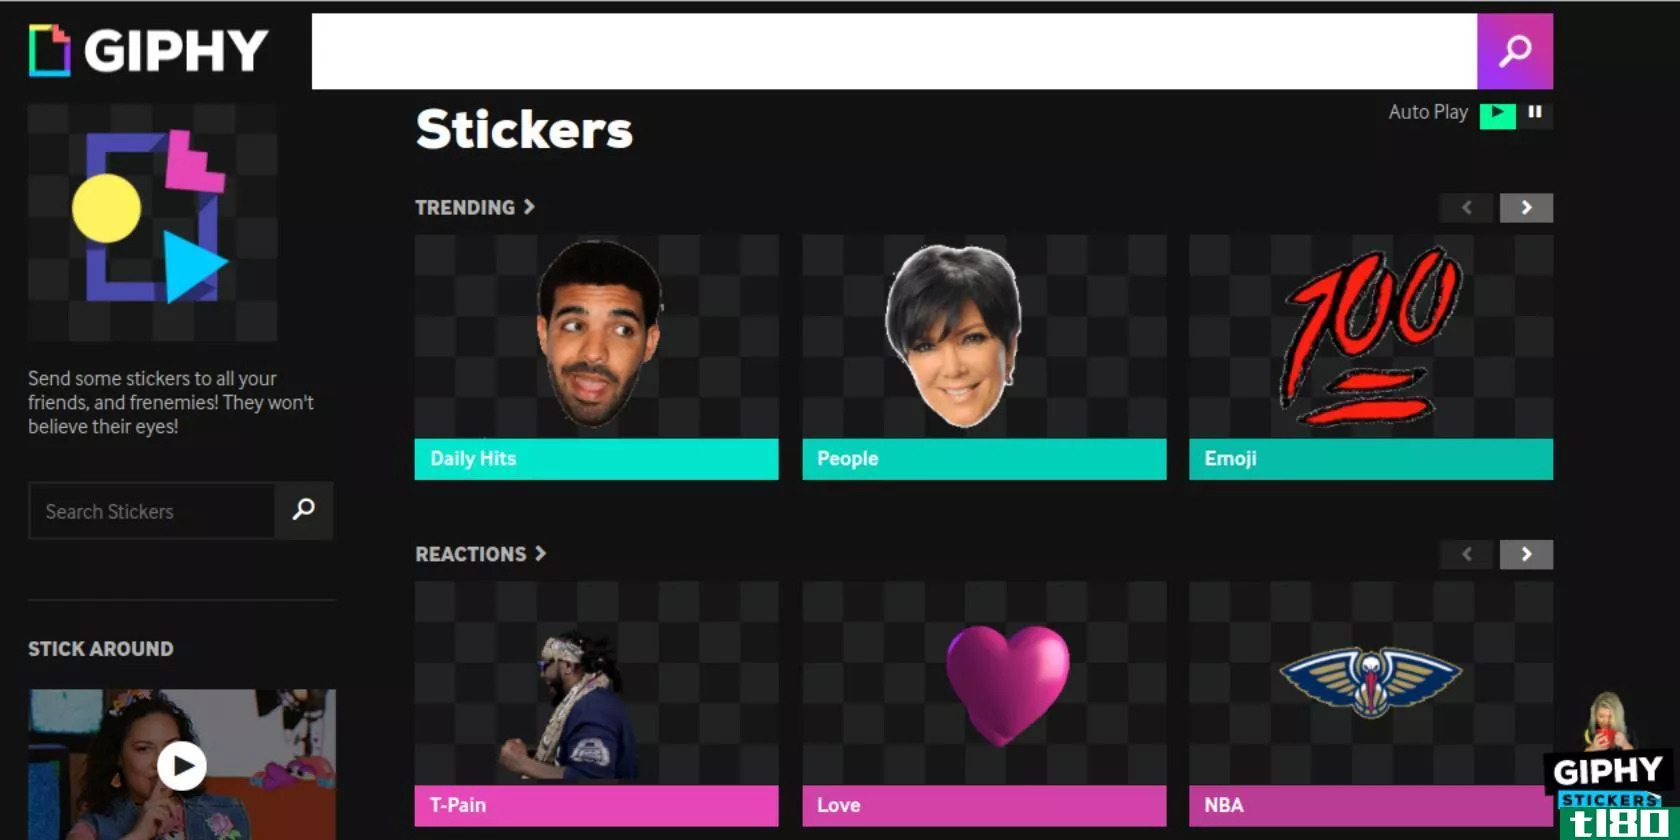 giphy-stickers-homepage-screenshot